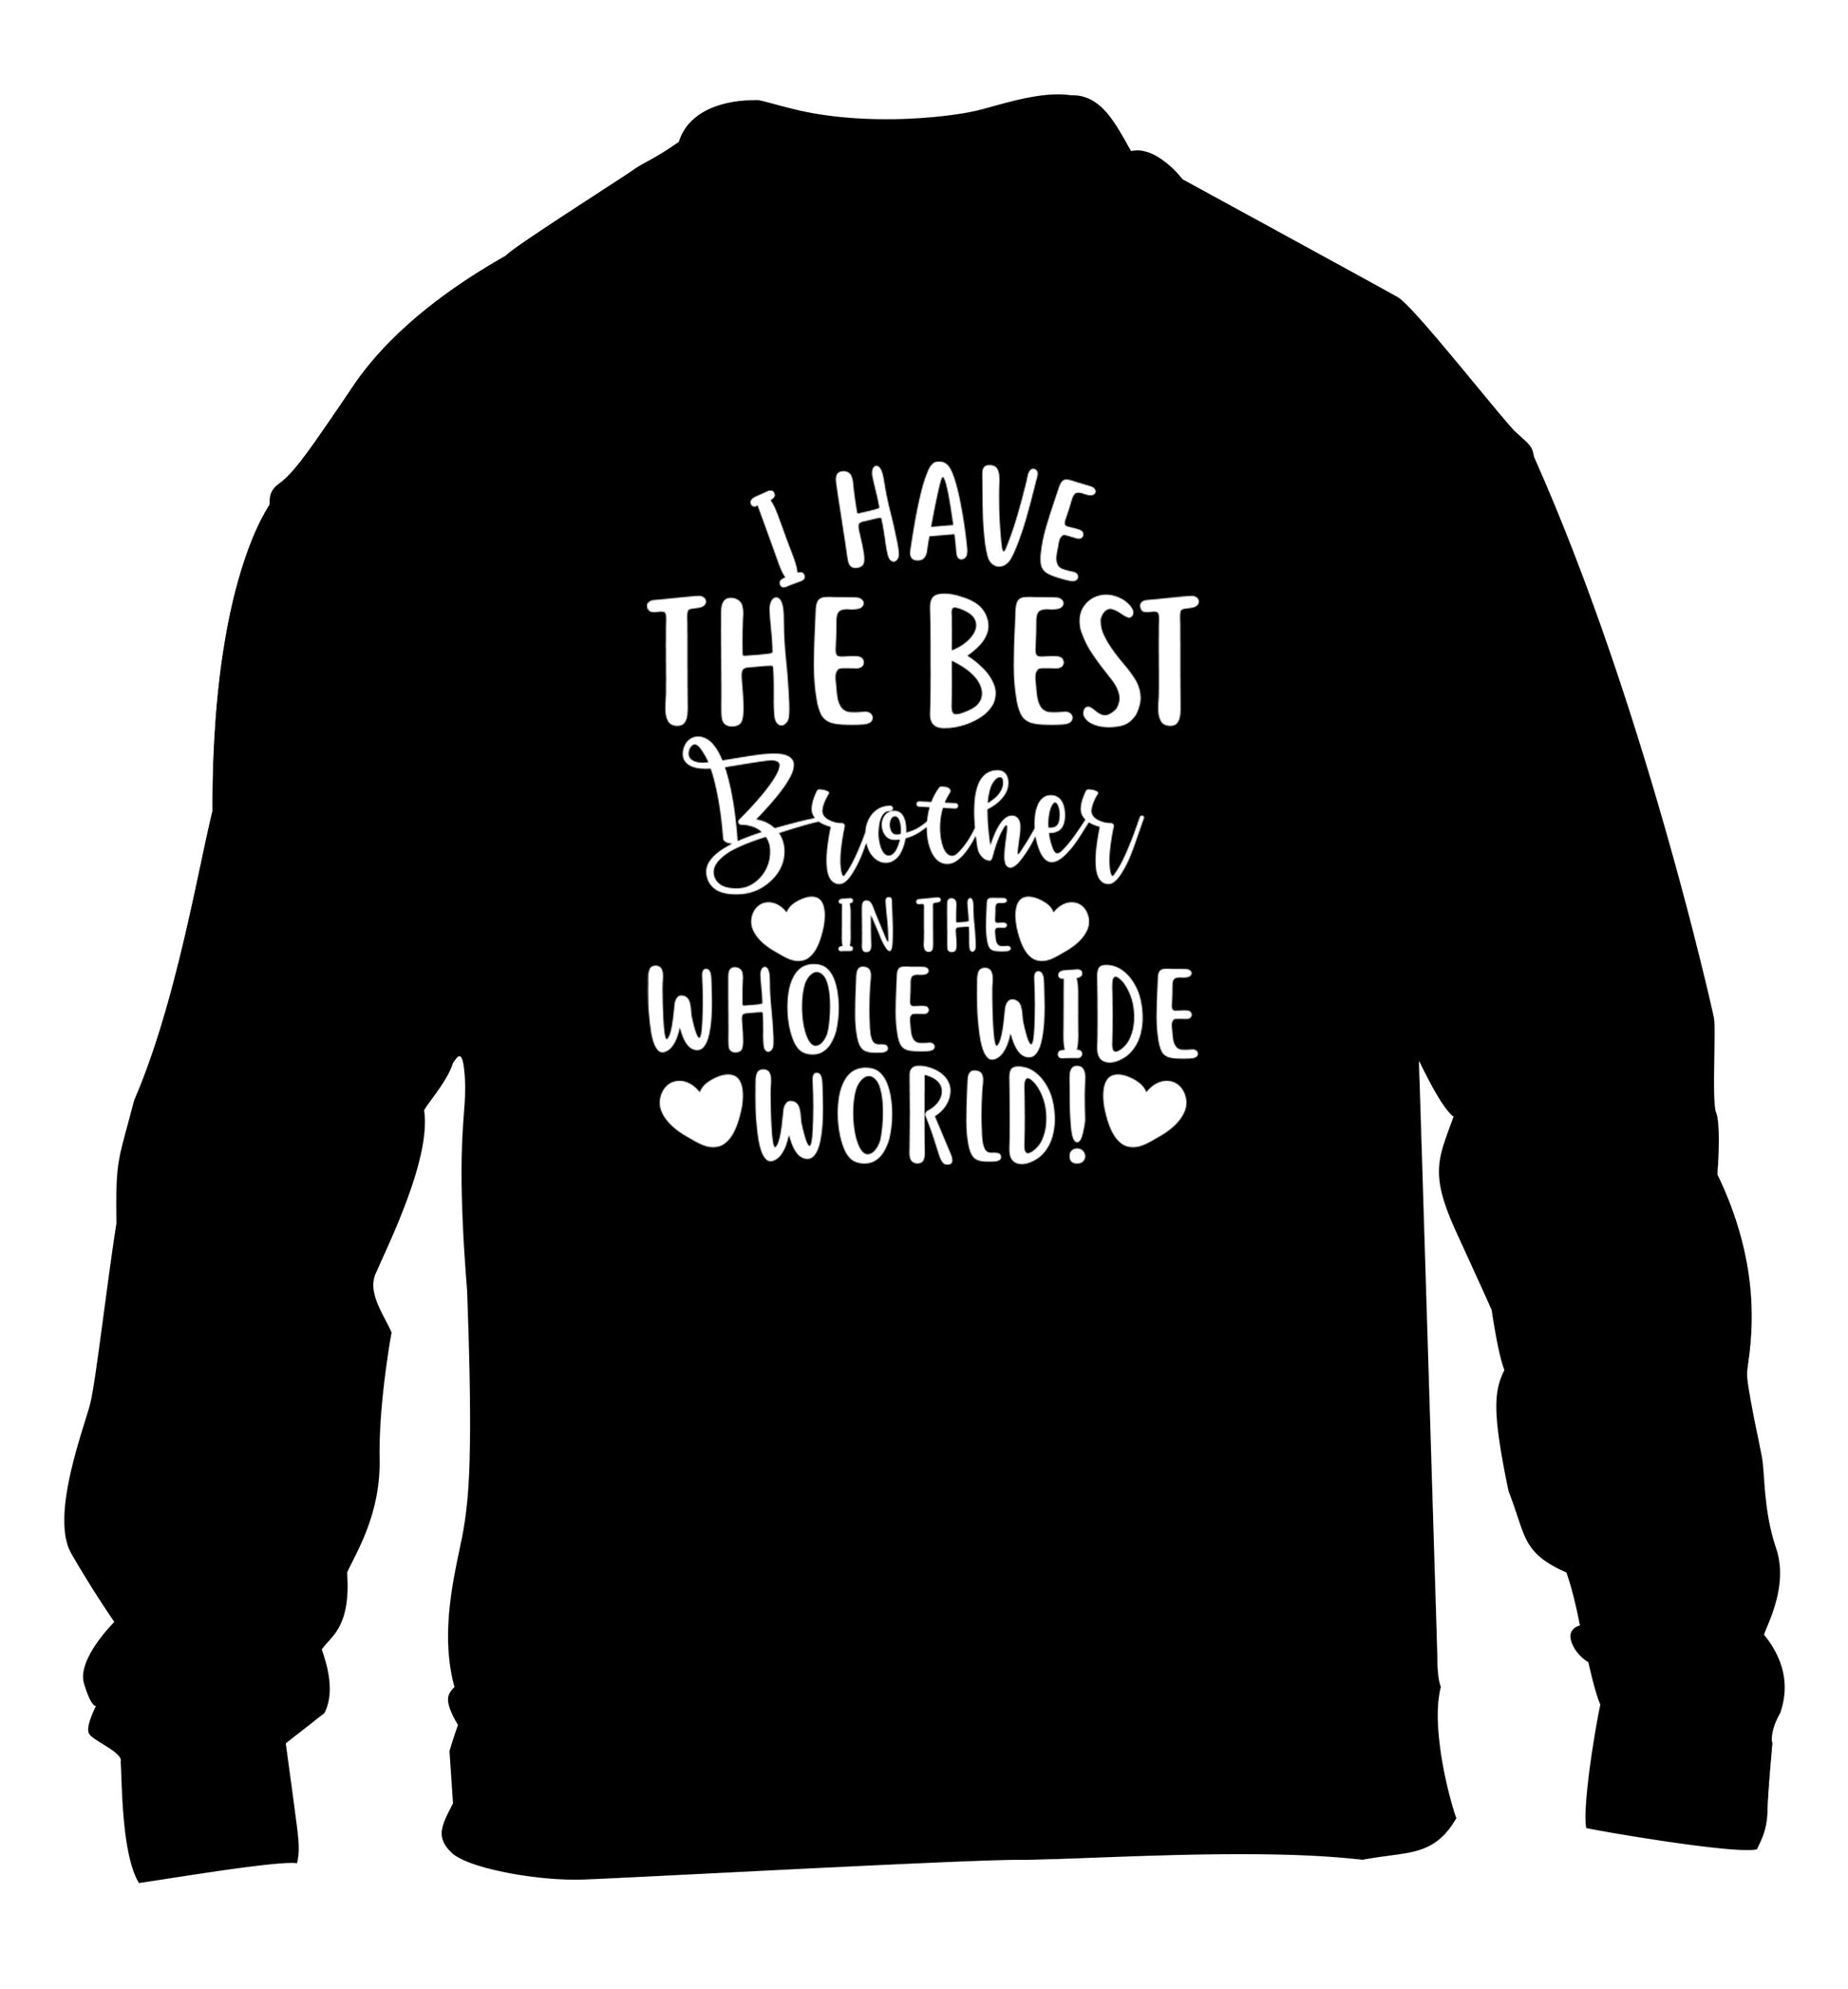 I have the best brother in the whole wide world! children's black sweater 12-13 Years